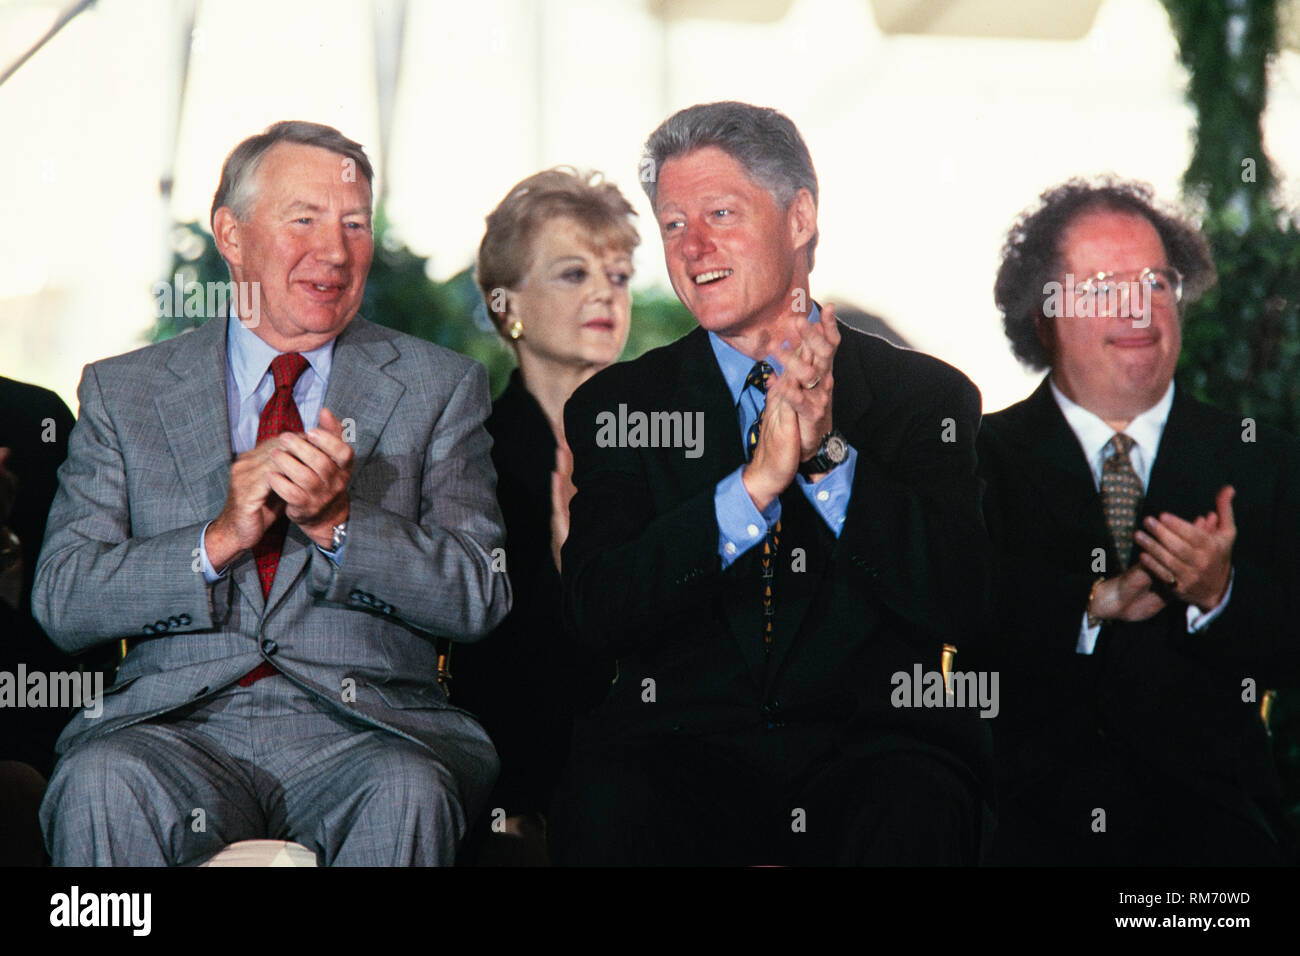 U.S. President Bill Clinton sits with Journalist Robert MacNeil, left, and Music Director of the Metropolitan Opera James Levine, right, during the National Medal of Arts and Humanities awards during a ceremony on the South Lawn of the White House September 29, 1997 in Washington, DC. Stock Photo